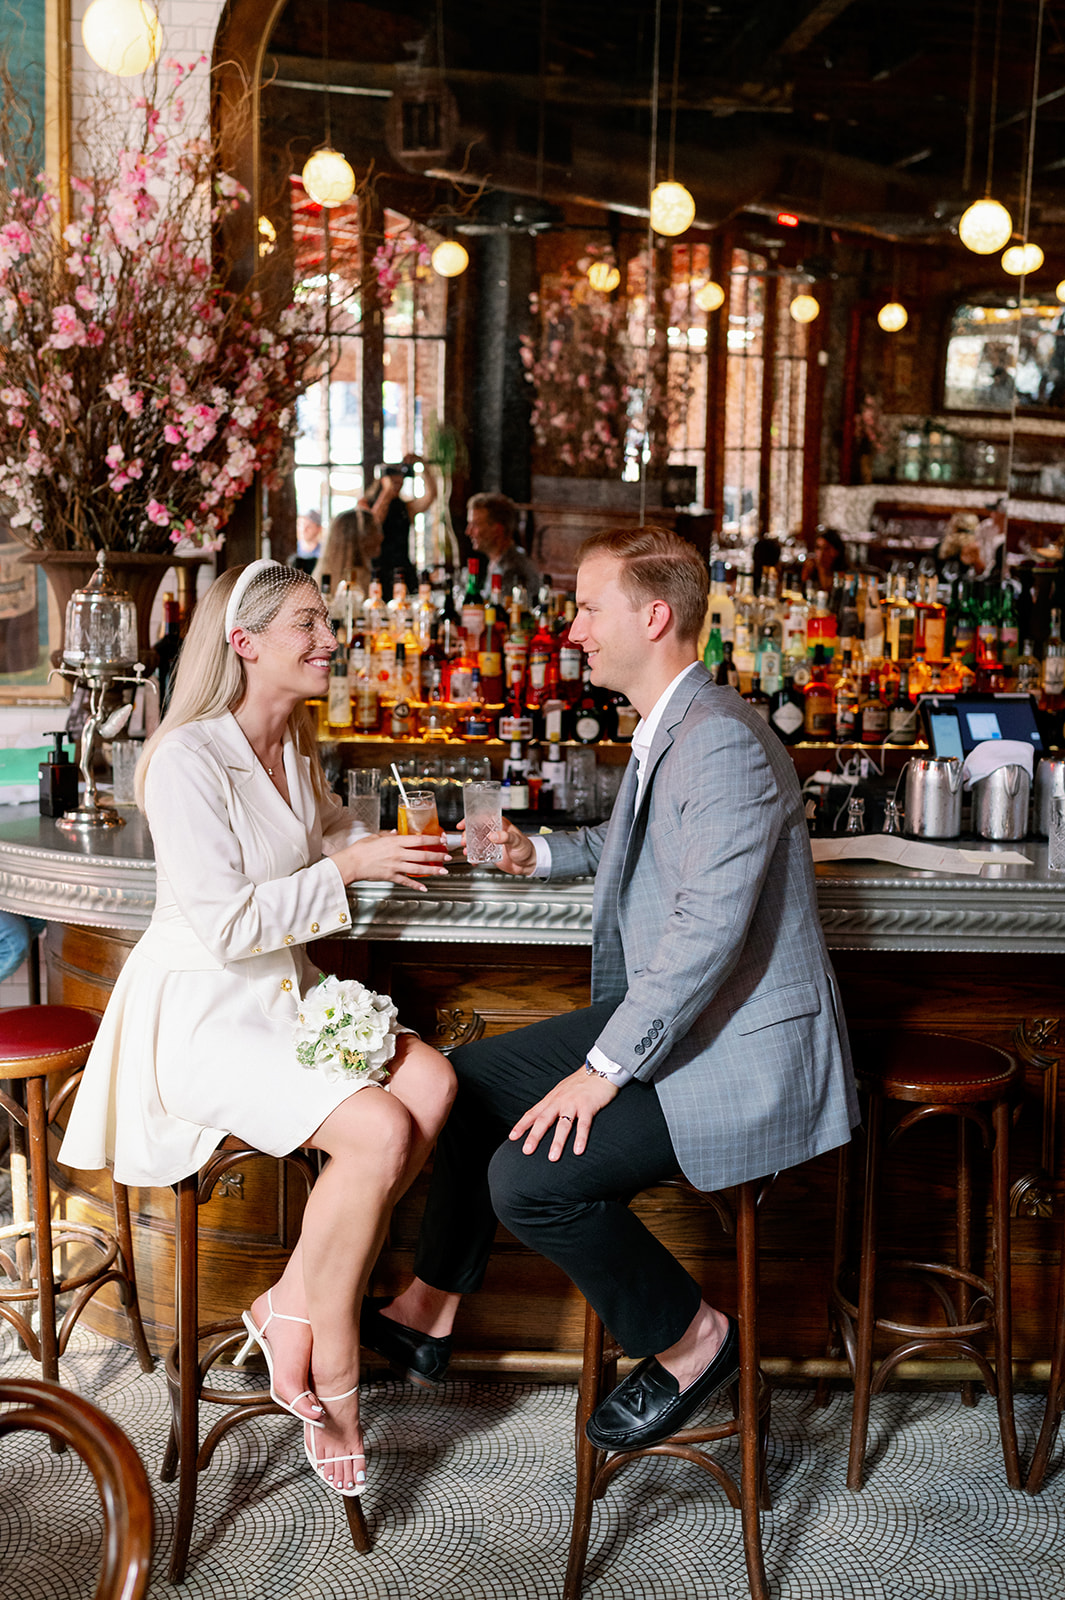 Bride and groom share smiles and a drink in a NYC bar, celebrating their intimate ceremony.